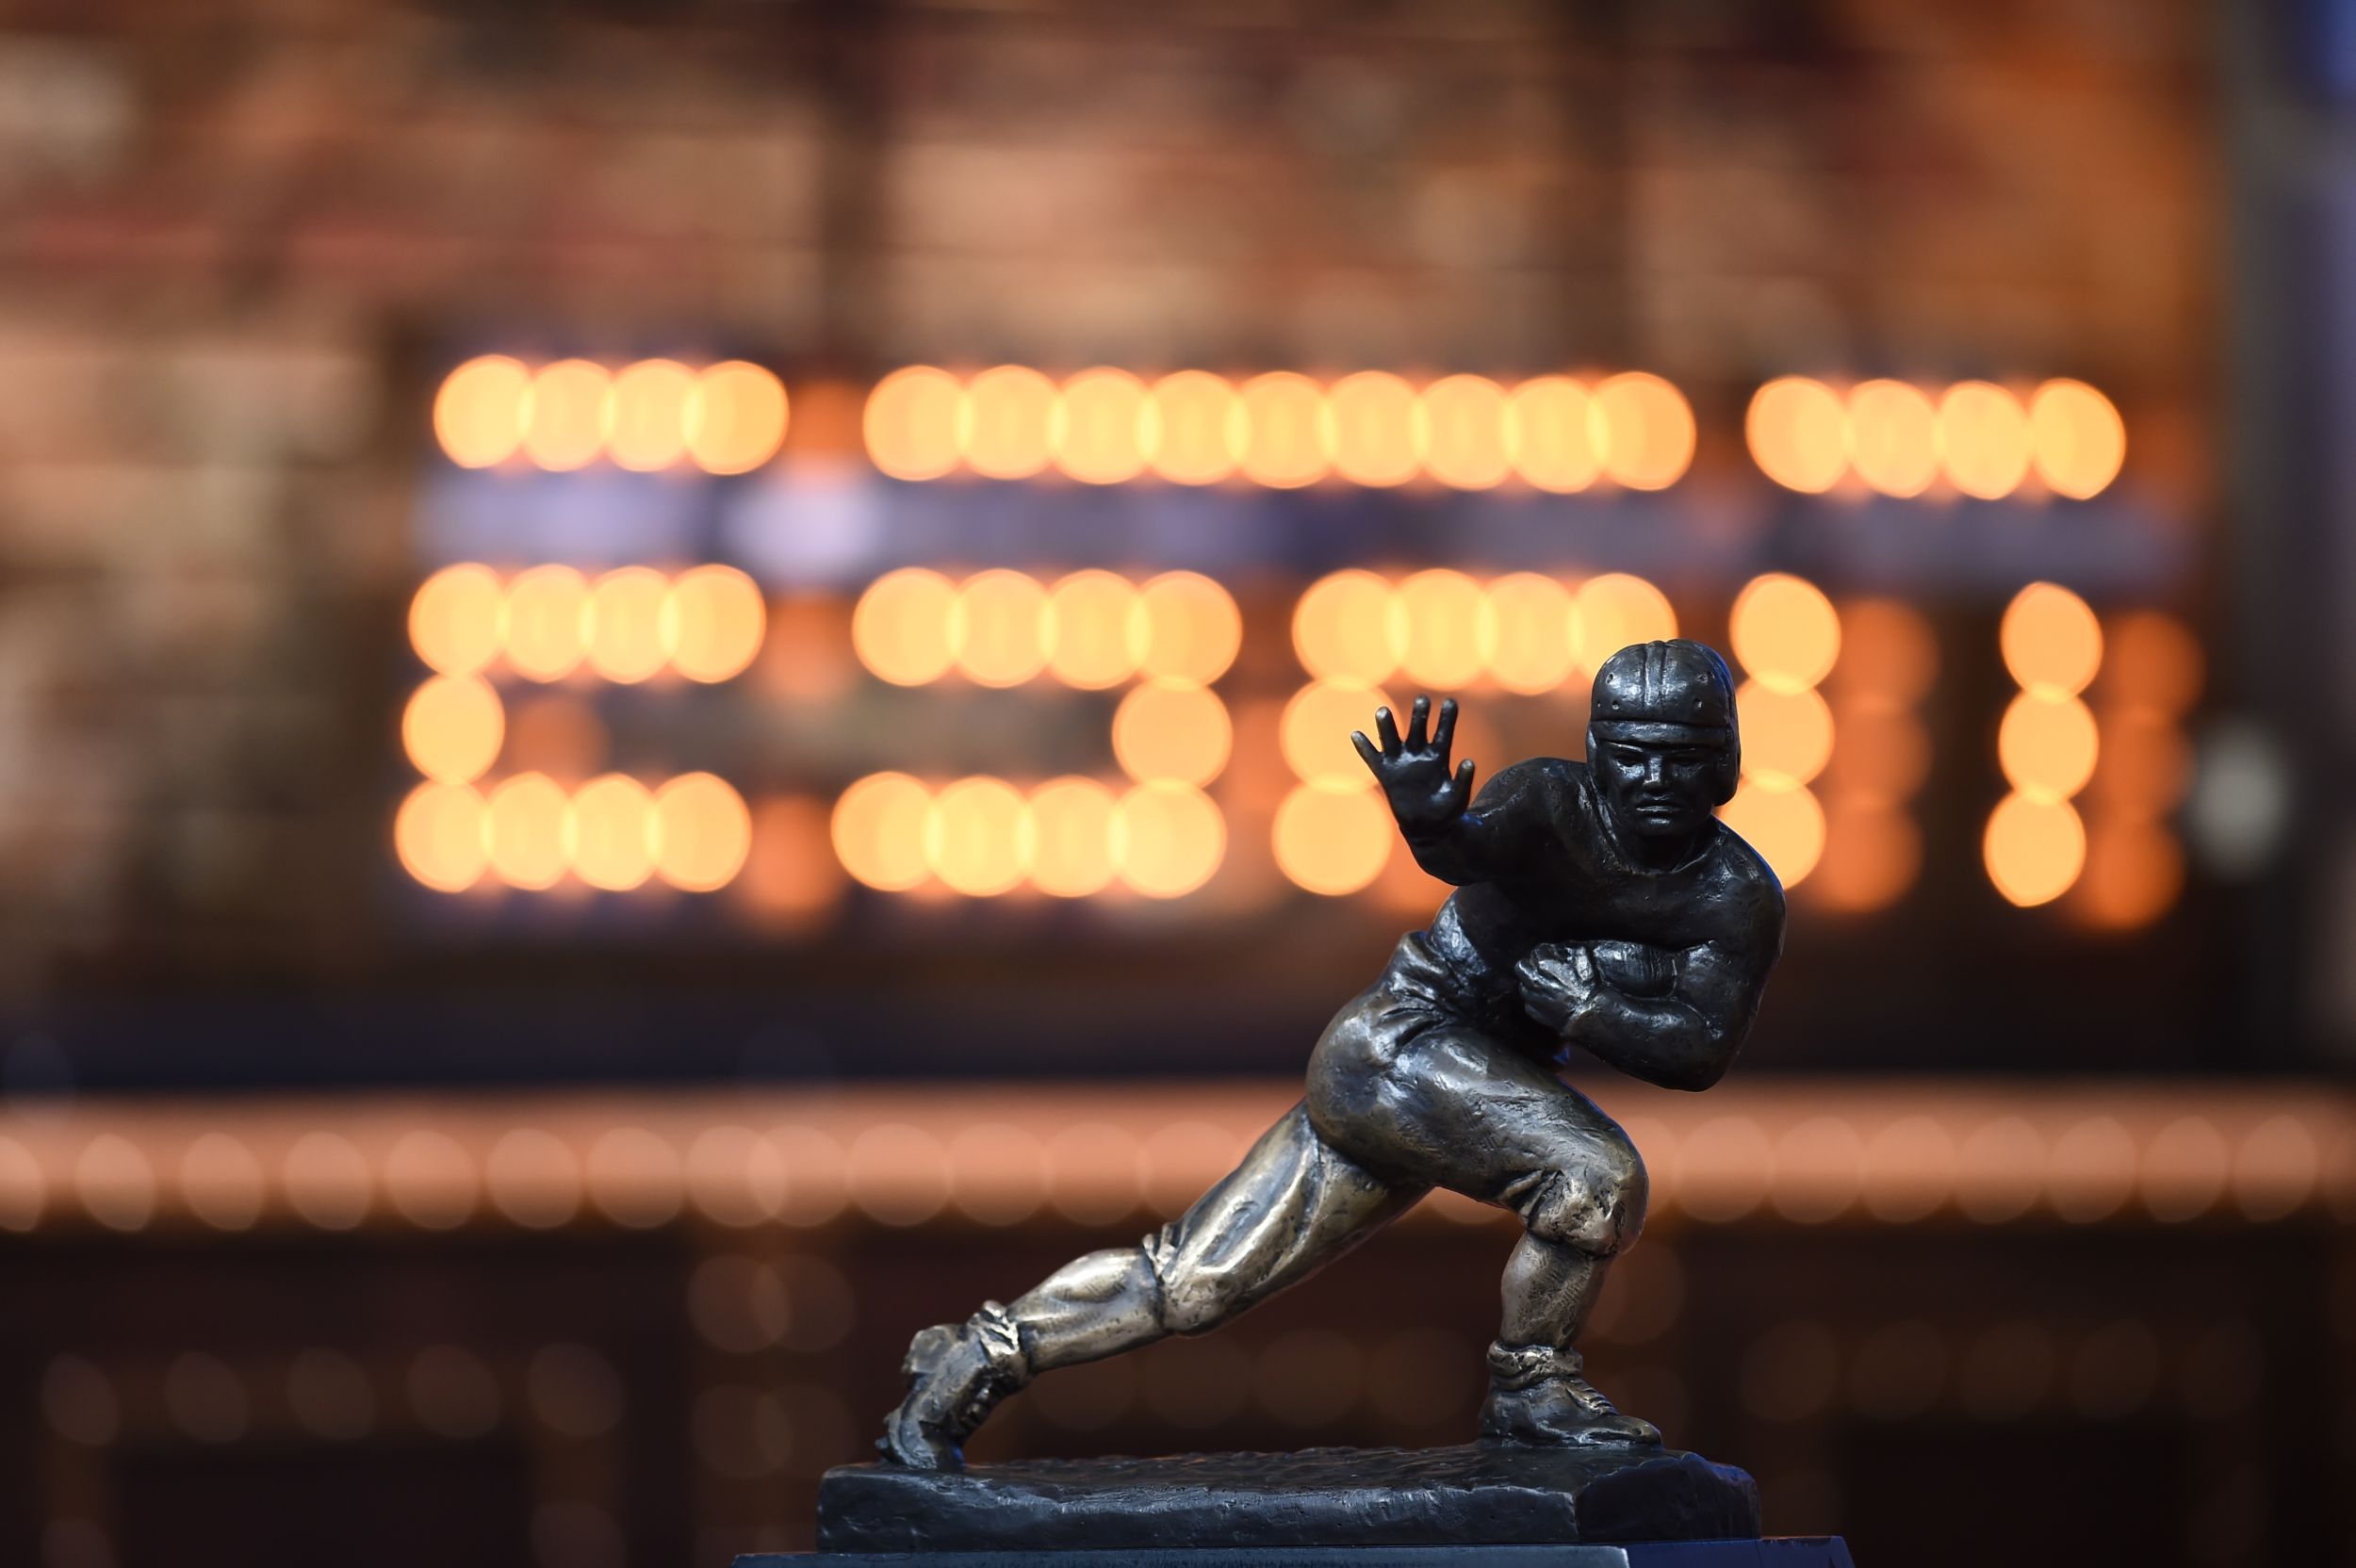 ESPN Reaches New Multi-Year Agreement with The Heisman Trust – The 86th Annual Heisman Trophy Ceremony to Air January 5